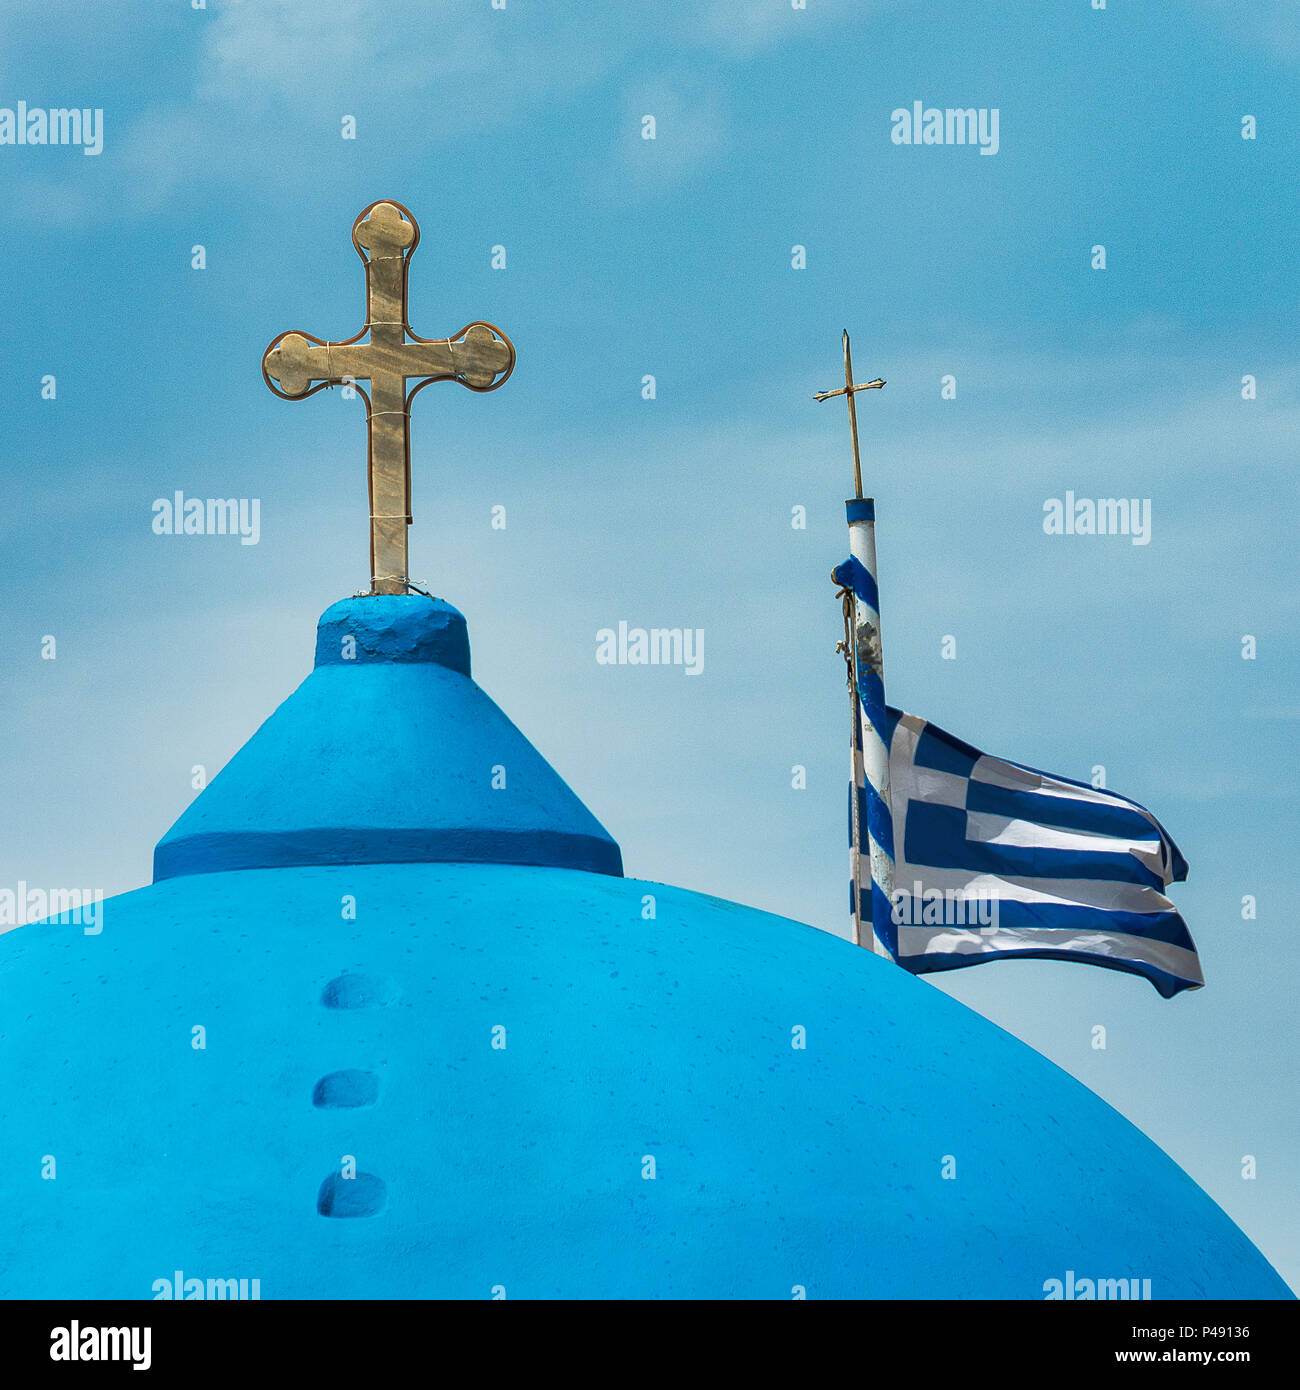 Blue dome and cross on a Greek Orthodox Church with the Greek flag on the Aegean Island of Santorini, Greece Stock Photo